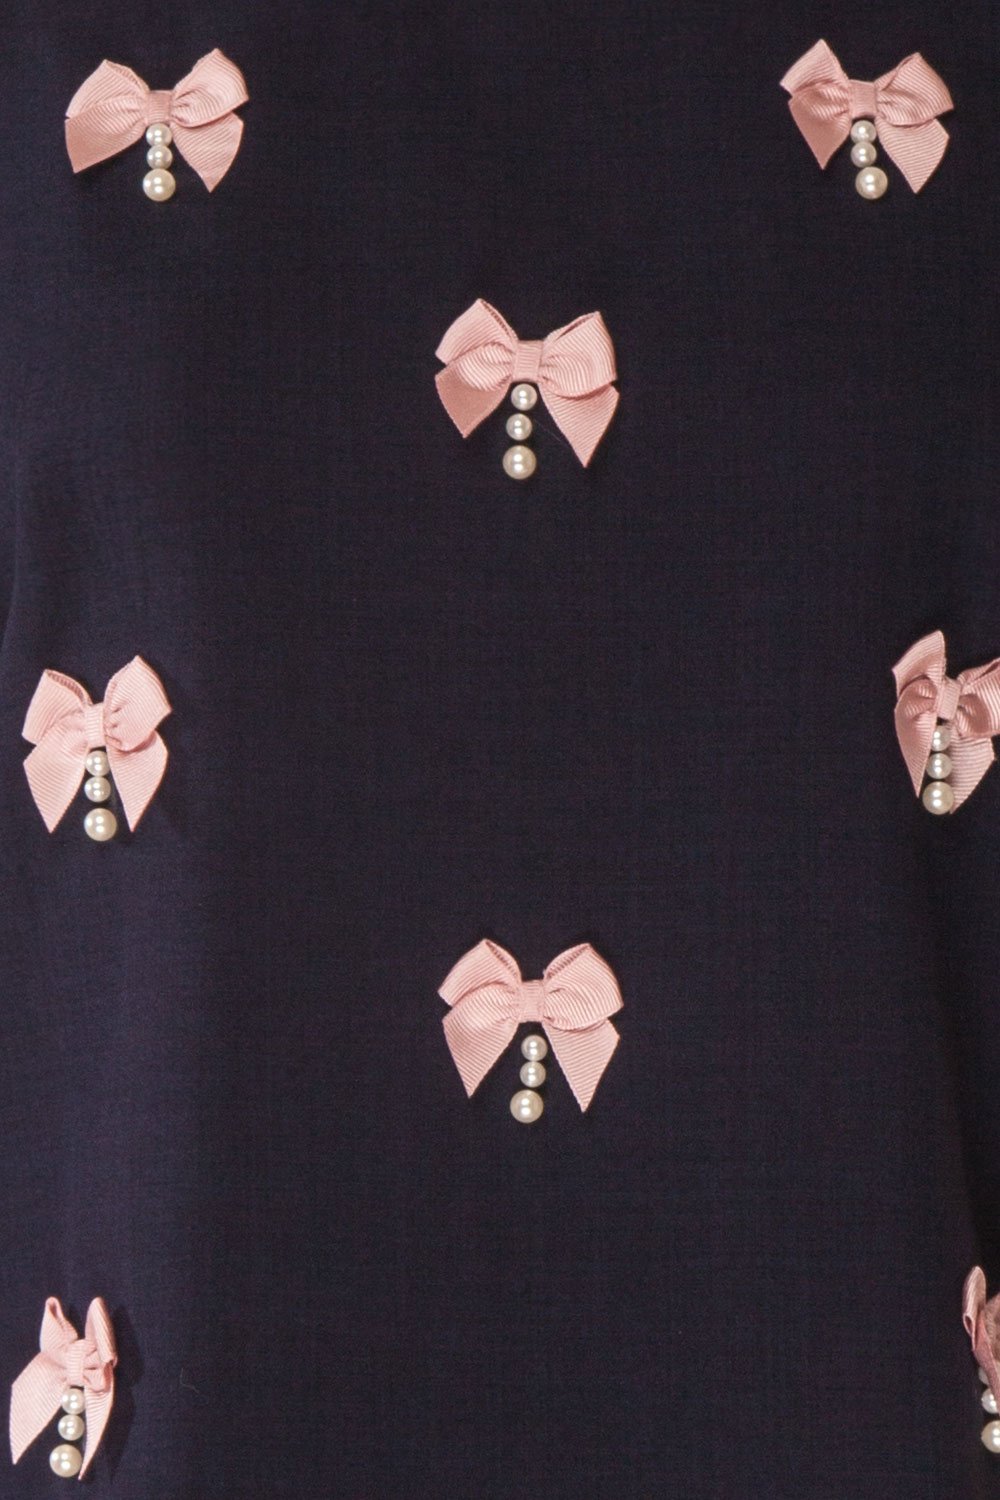 Jehane Loose Navy T-Shirt with Pink Bows & Pearls | Boutique 1861 9